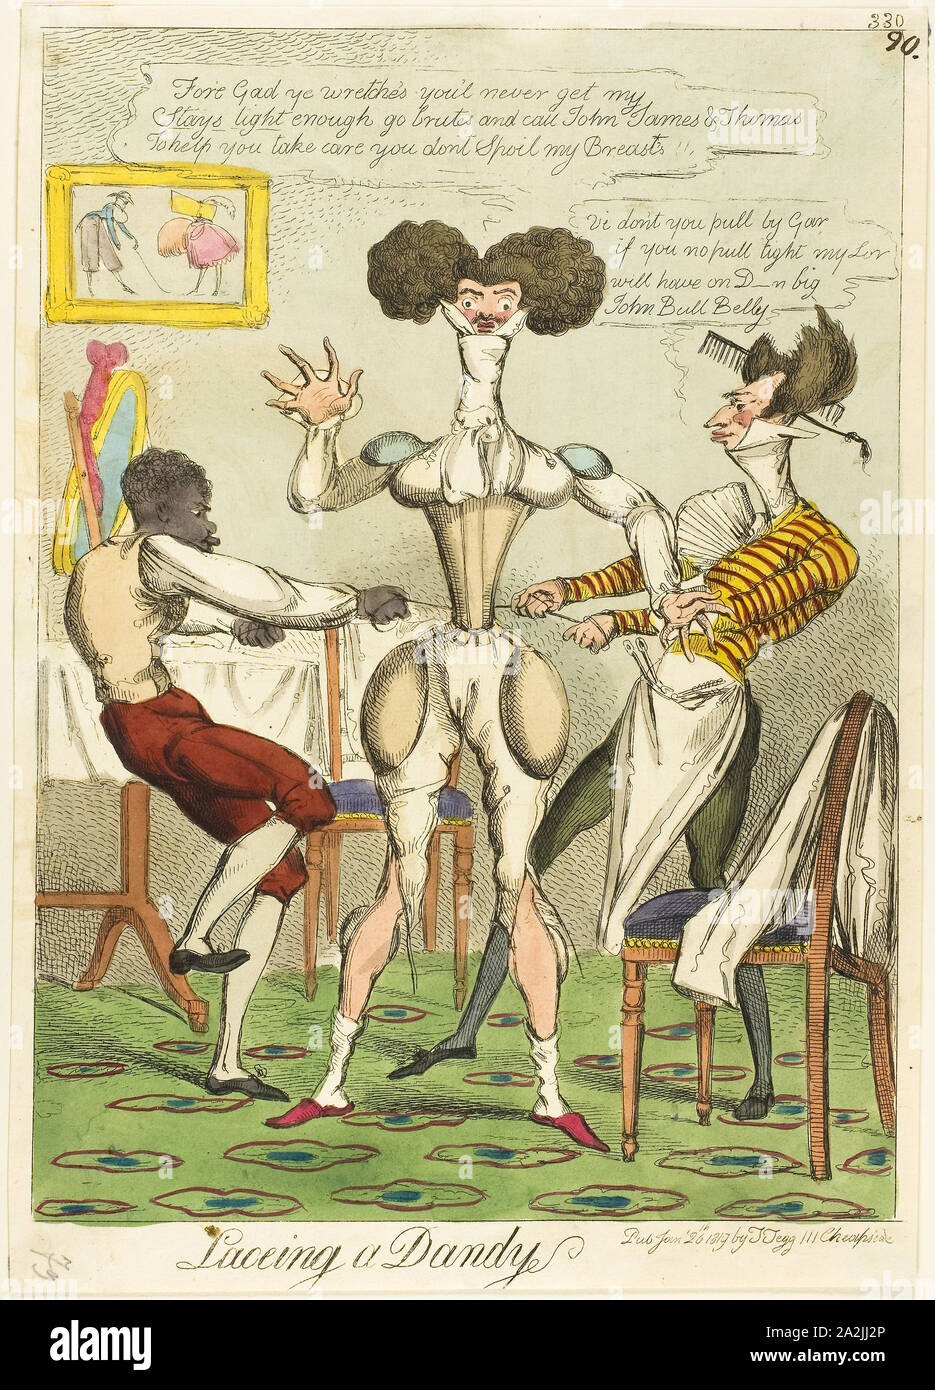 Lacing a Dandy, published January 26, 1819, Unknown Artist (English), published by Thomas Tegg (English, 1776-1845), England, Handcolored etching on cream wove paper, 300 × 216 mm (image), 322 × 228 mm (sheet), plate mark not visible Stock Photo